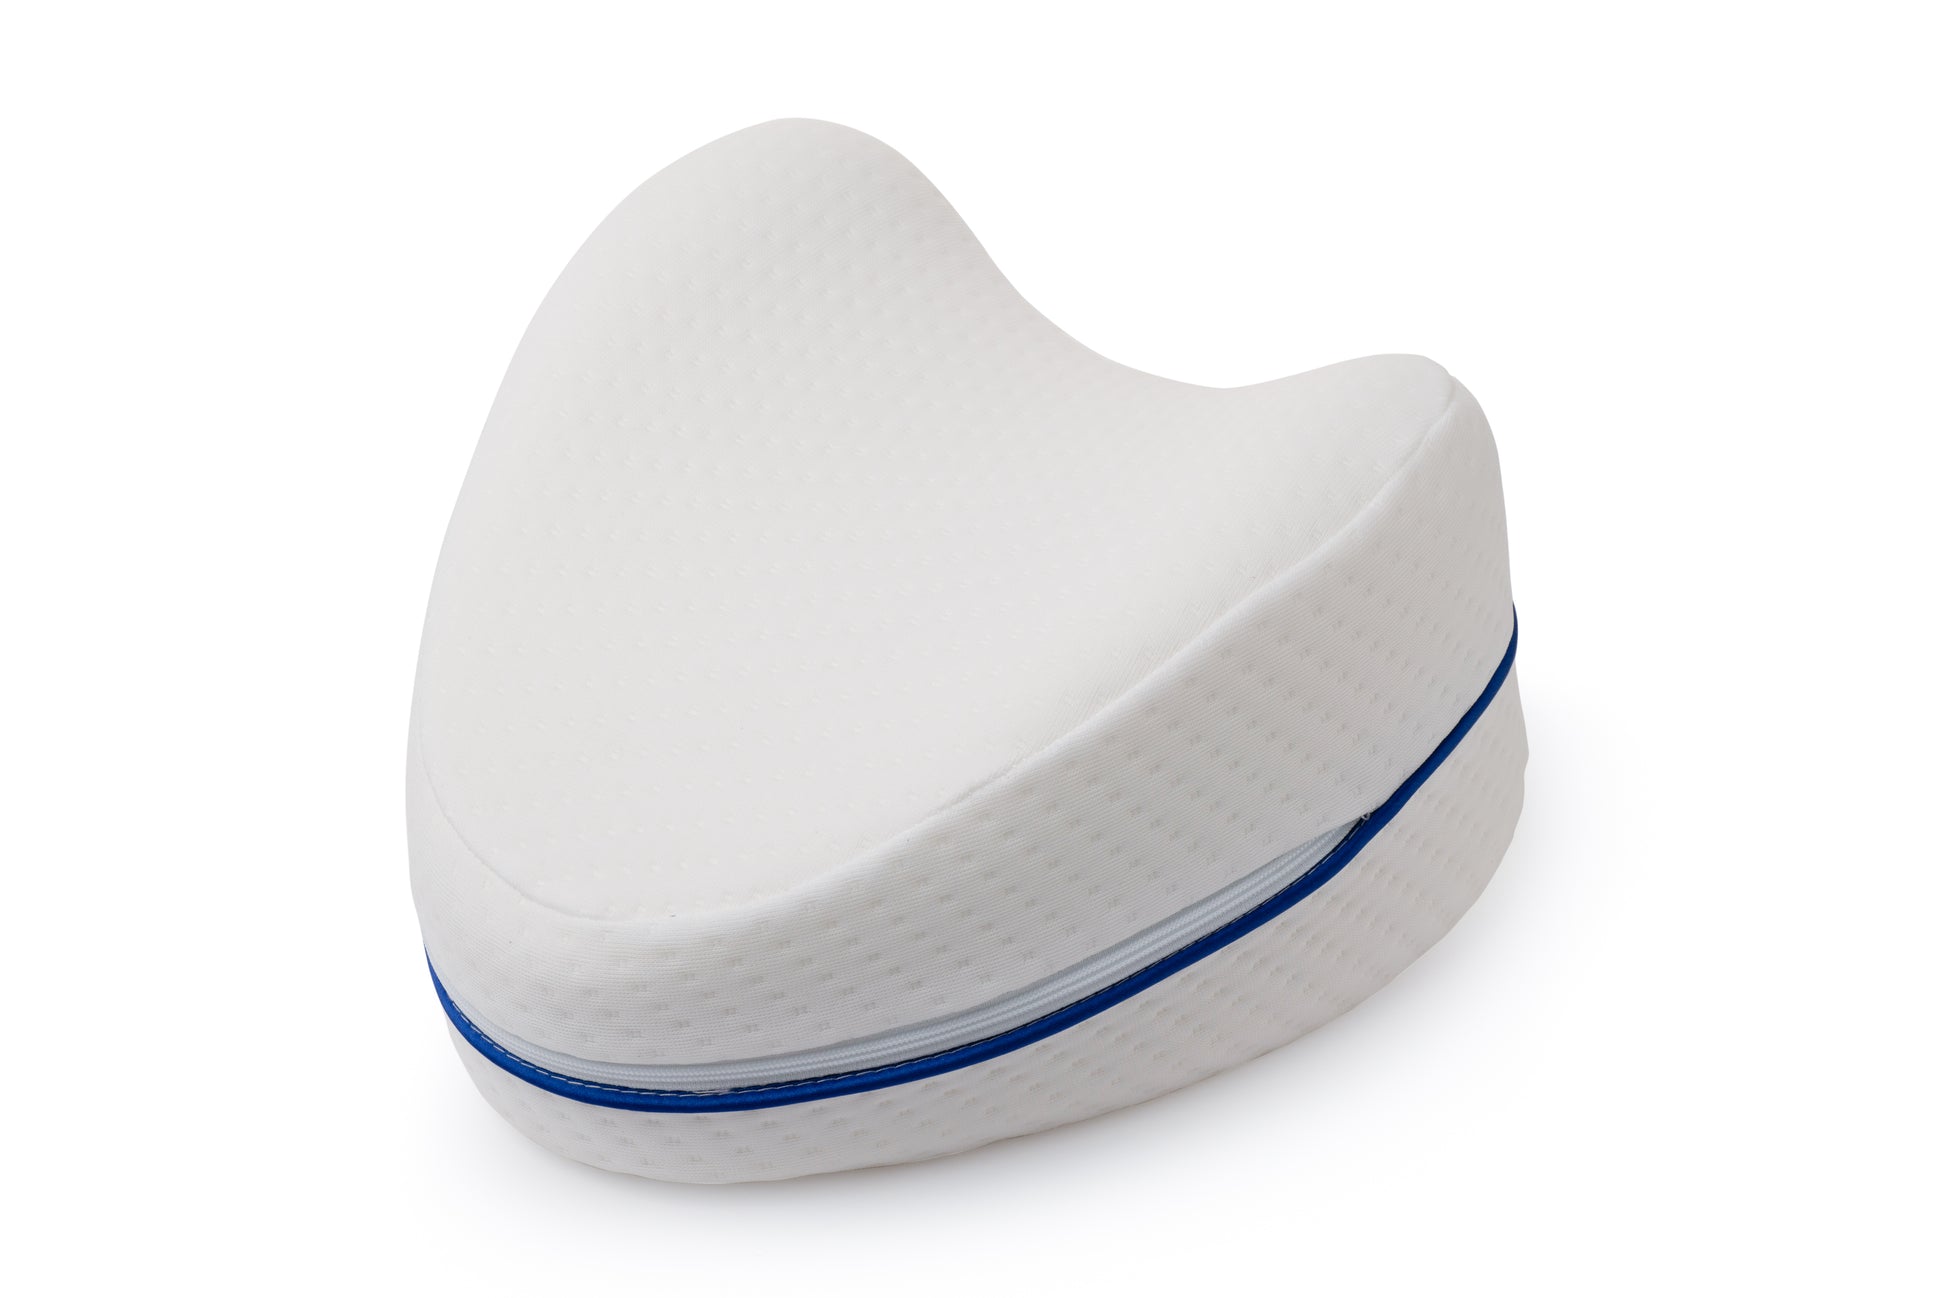 Revolutionize-Your-Nights-with-Importikaah's-Knee-Pillow-support